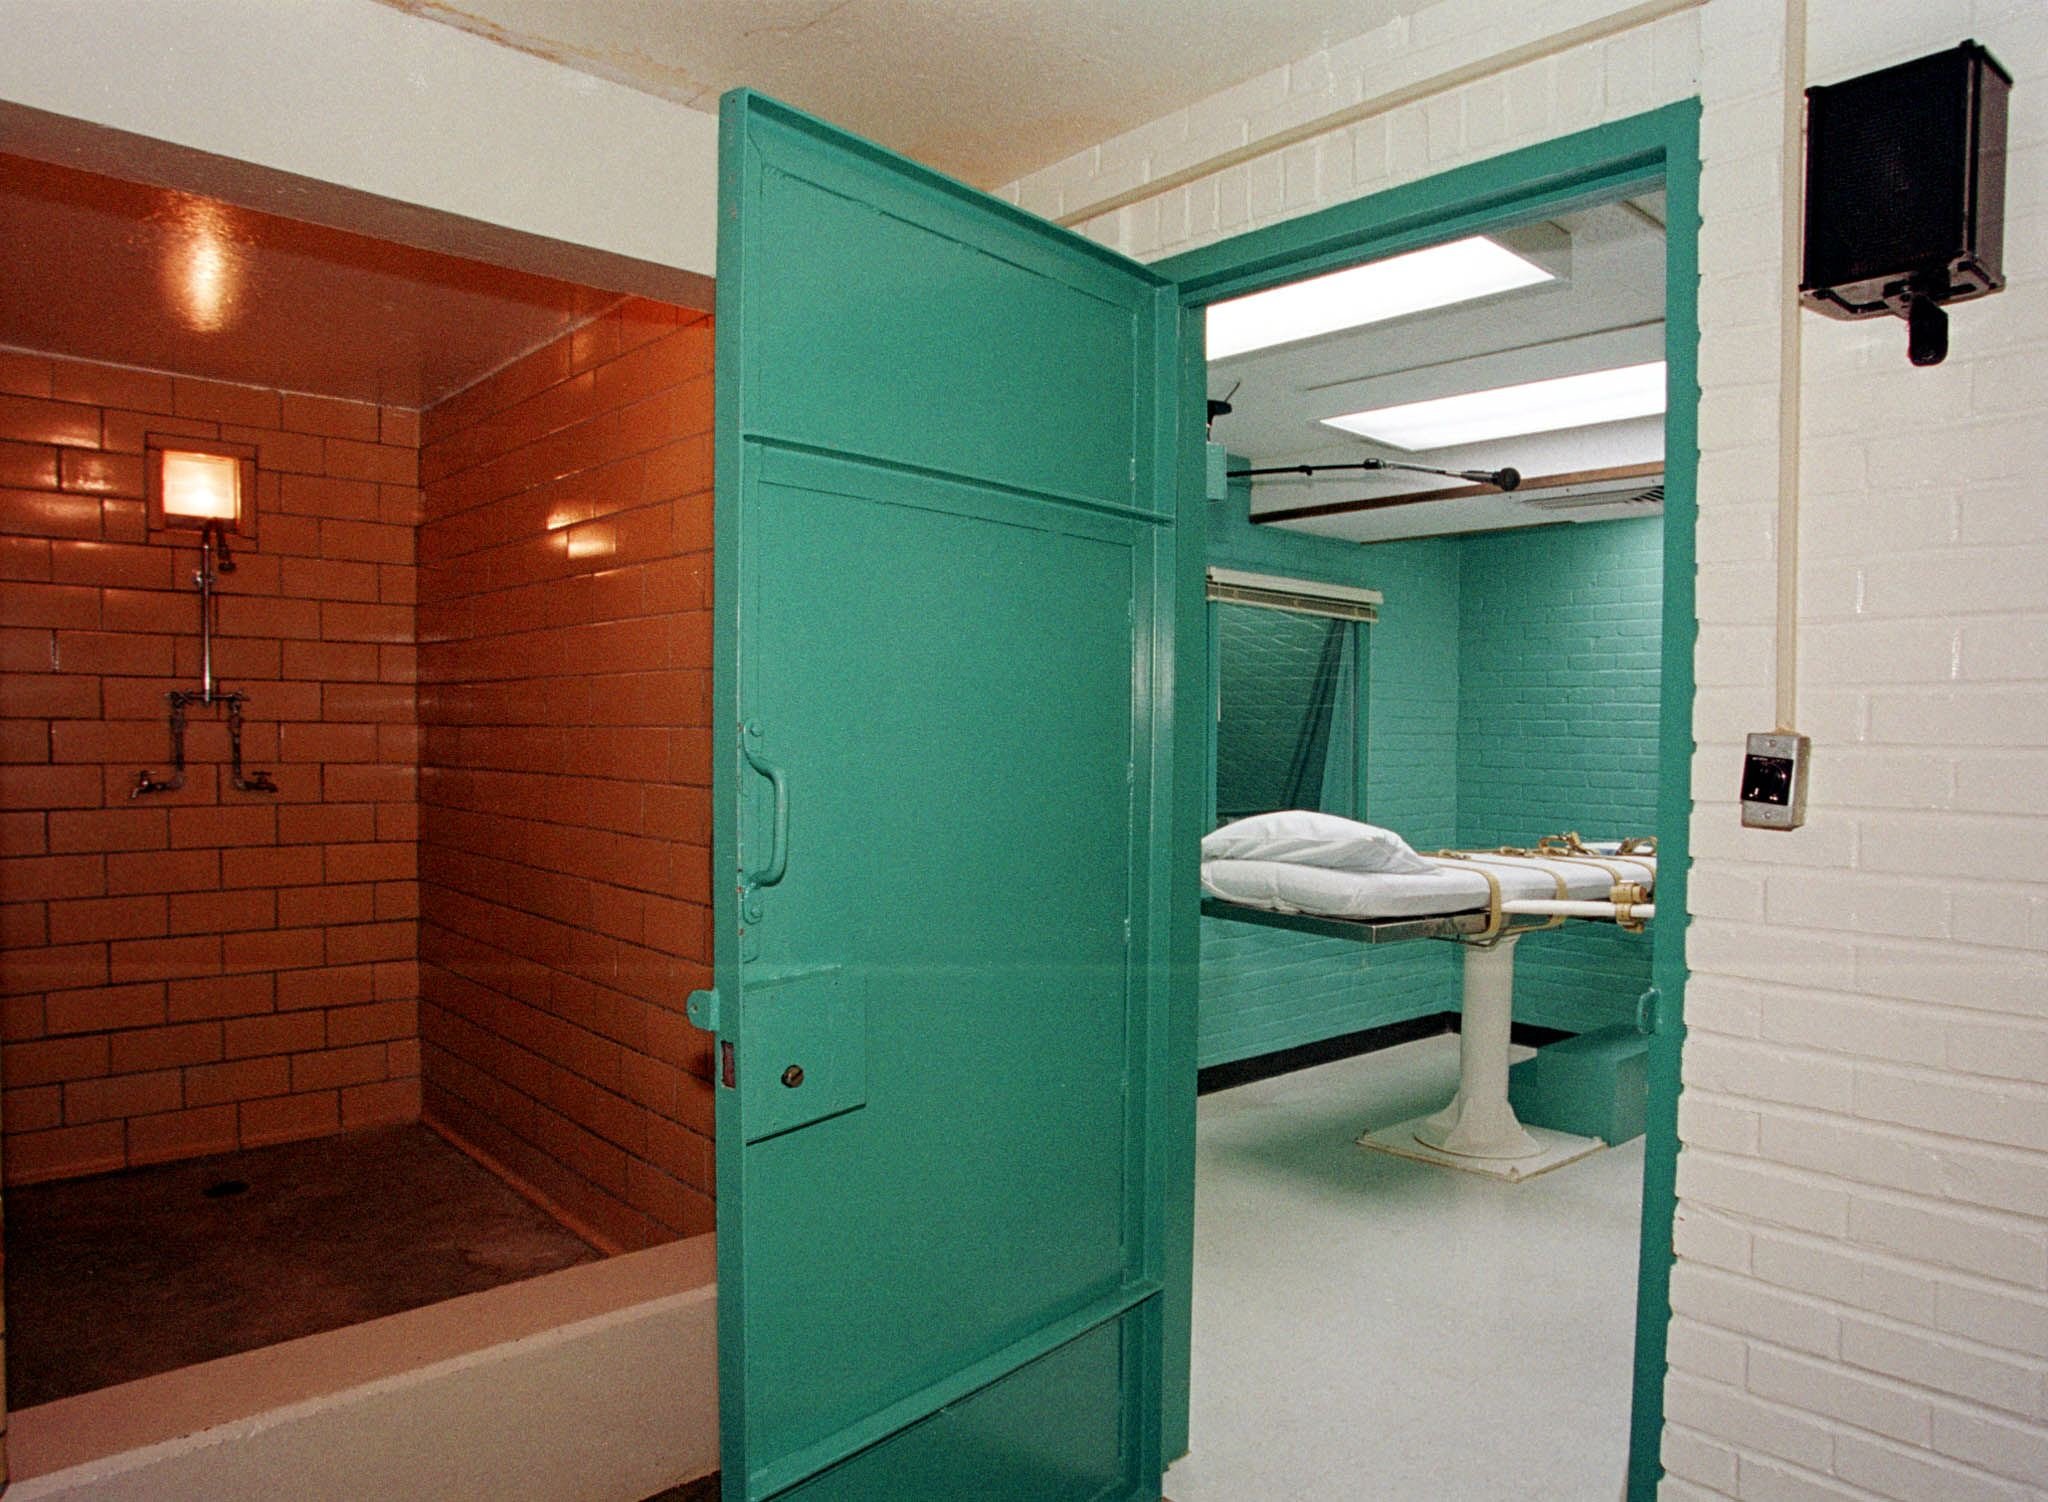 The death chamber at the Texas Department of Criminal Justice in Huntsville, Texas. strapped down to the gurney. (Paul Buck/AFP/Getty Images)